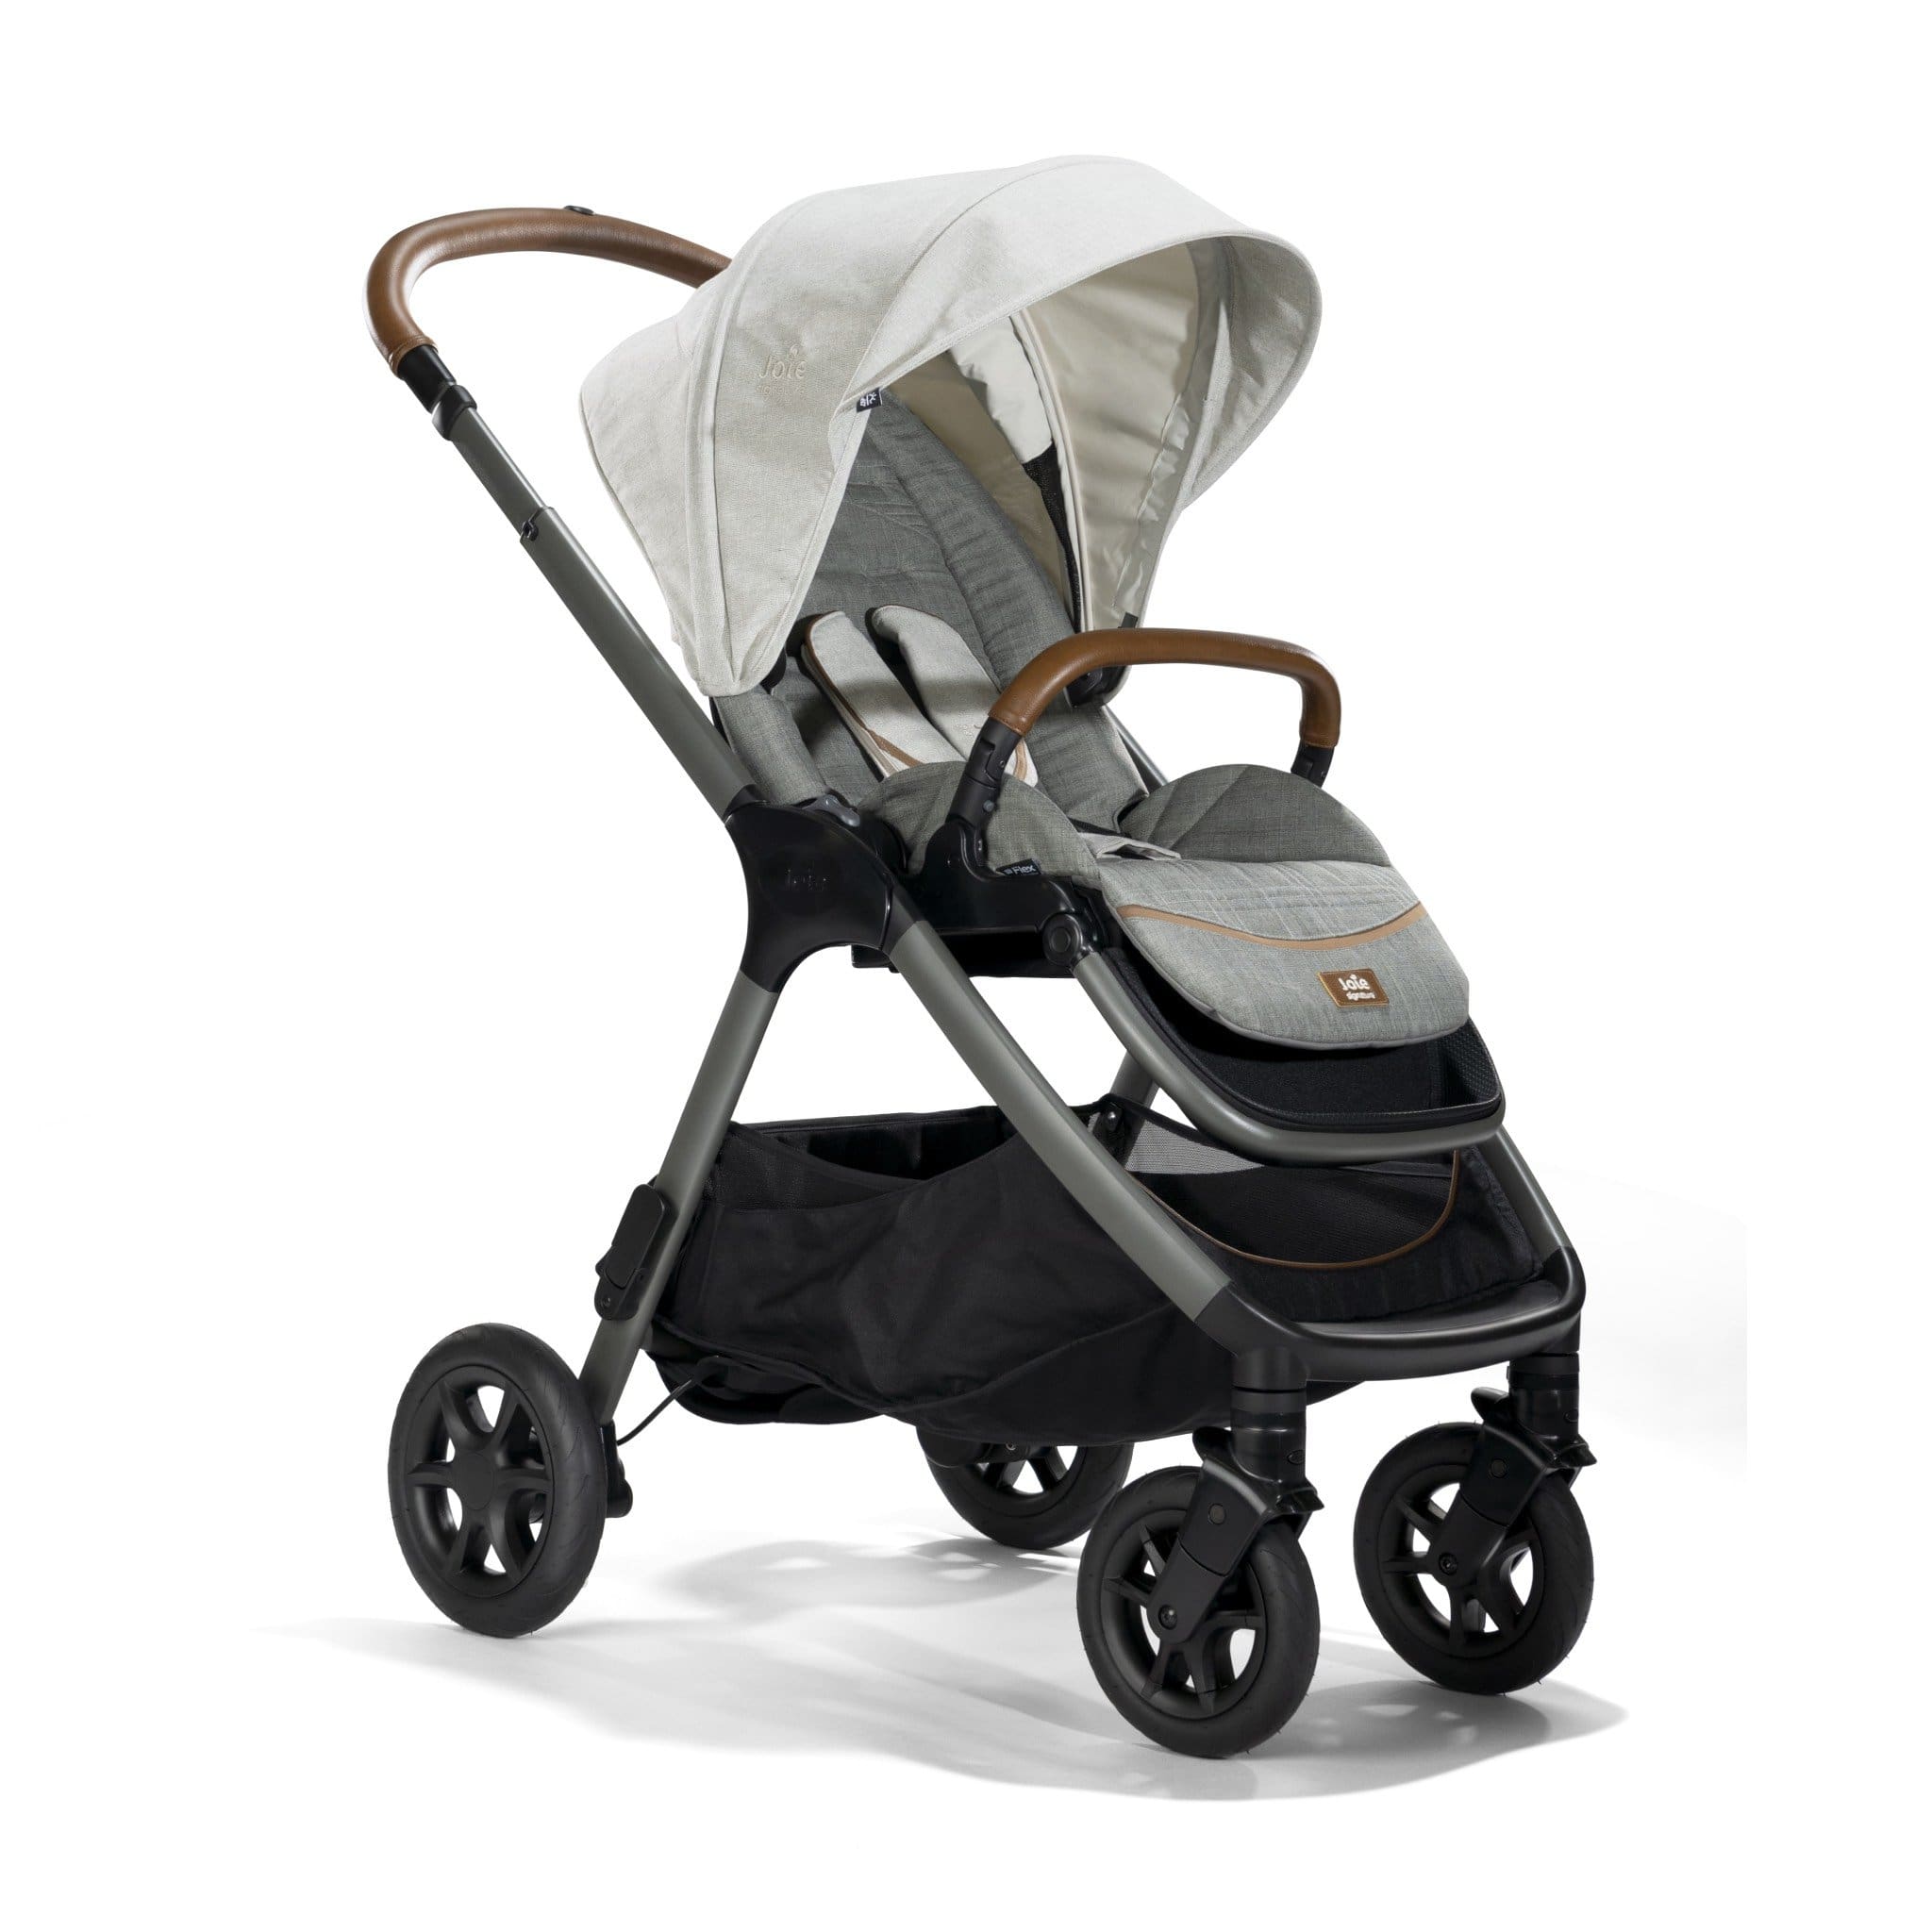 Joie Finiti 4in1 Signature Edition Pushchair & Carrycot Oyster Baby Prams 9301-OYS 5056080611181